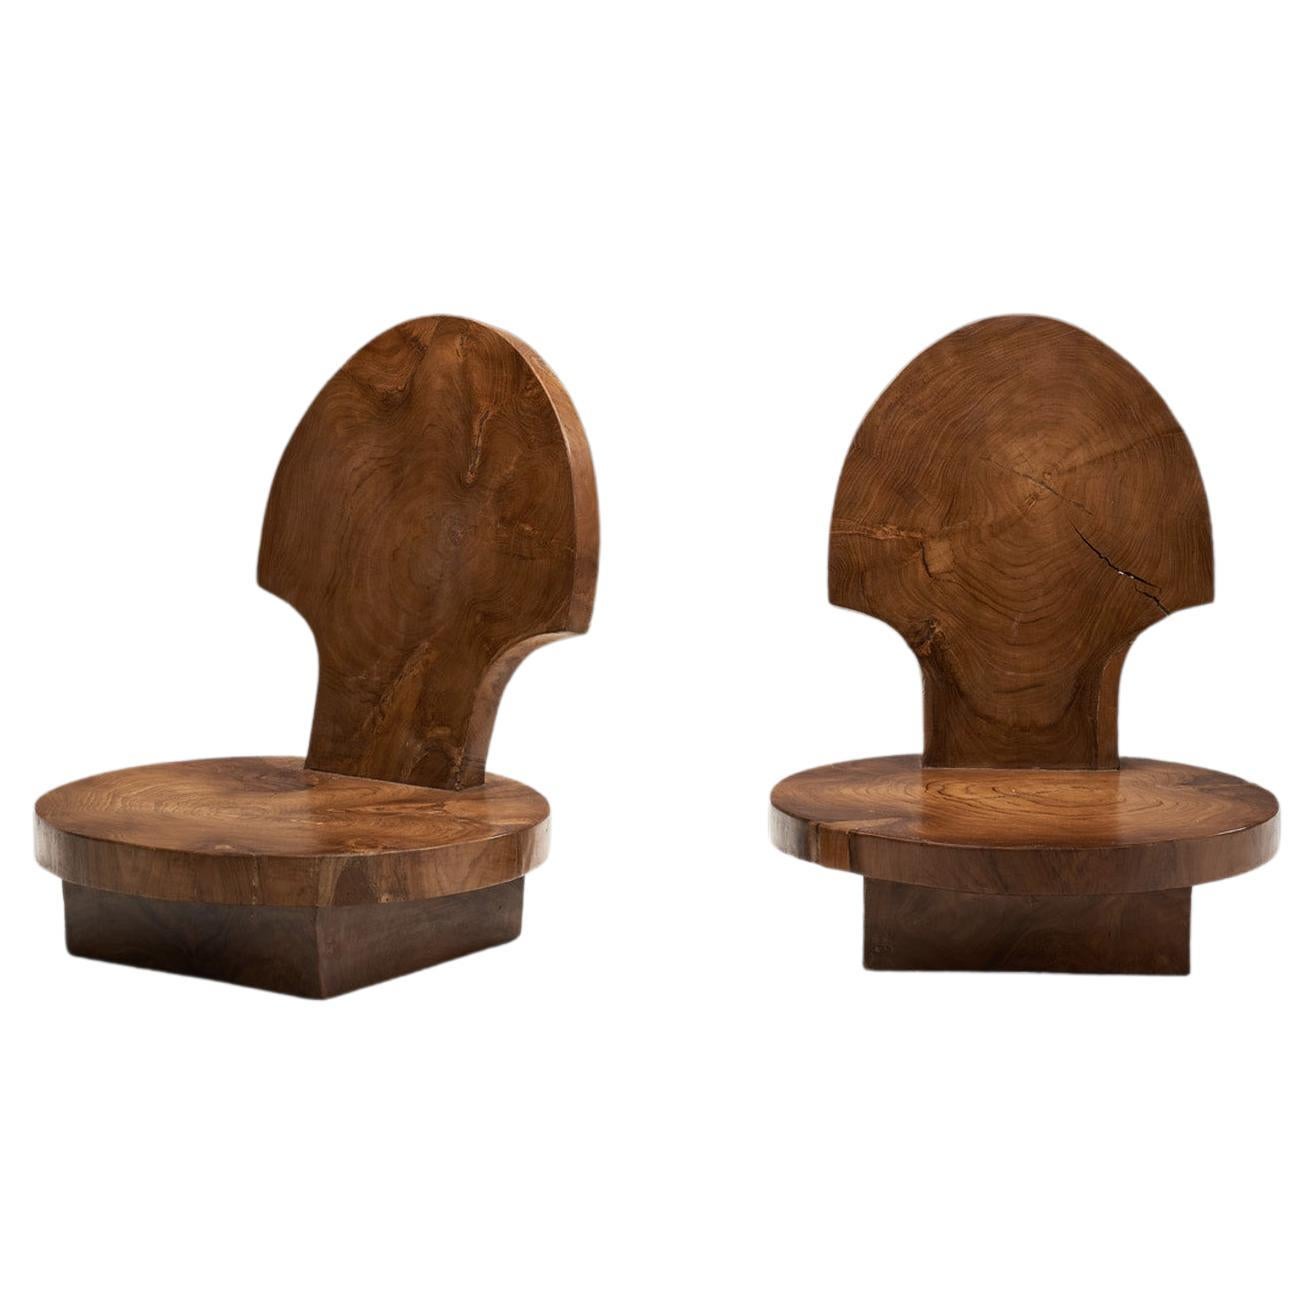 Contemporary Solid Wood Low Chairs, Asia, 21st Century For Sale